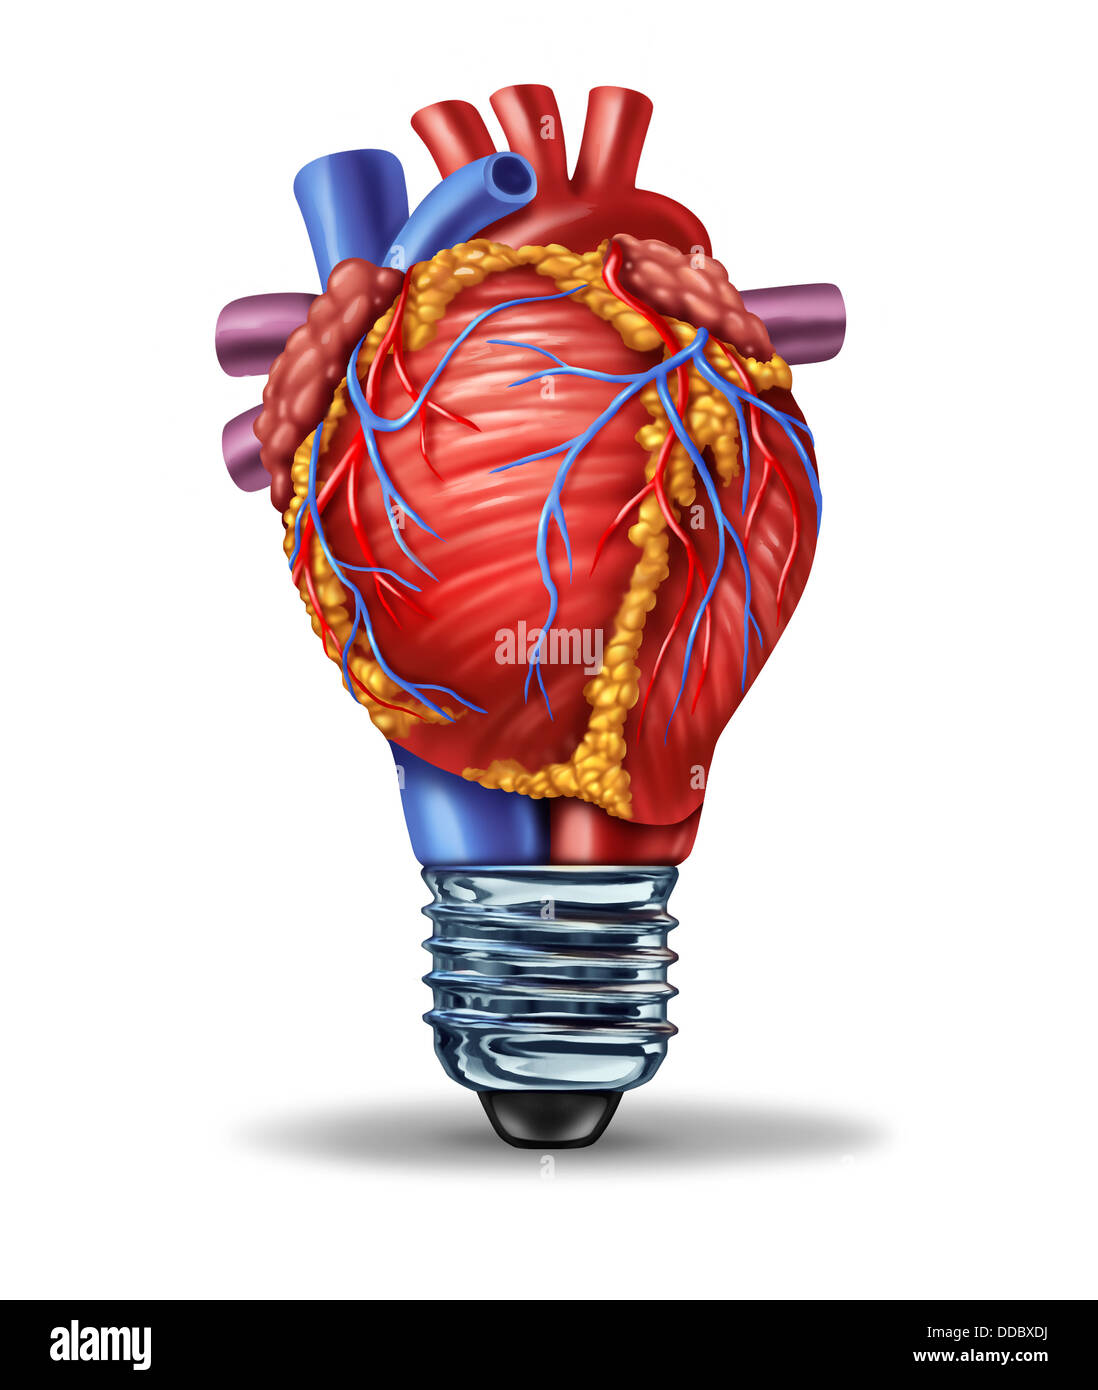 Heart Health Ideas and new cardiovascular research innovation as a medical concept with a human blood pumping organ in the shape of a light bulb as a symbol of anatomy circulation disease solutions and developing new medicine cure. Stock Photo